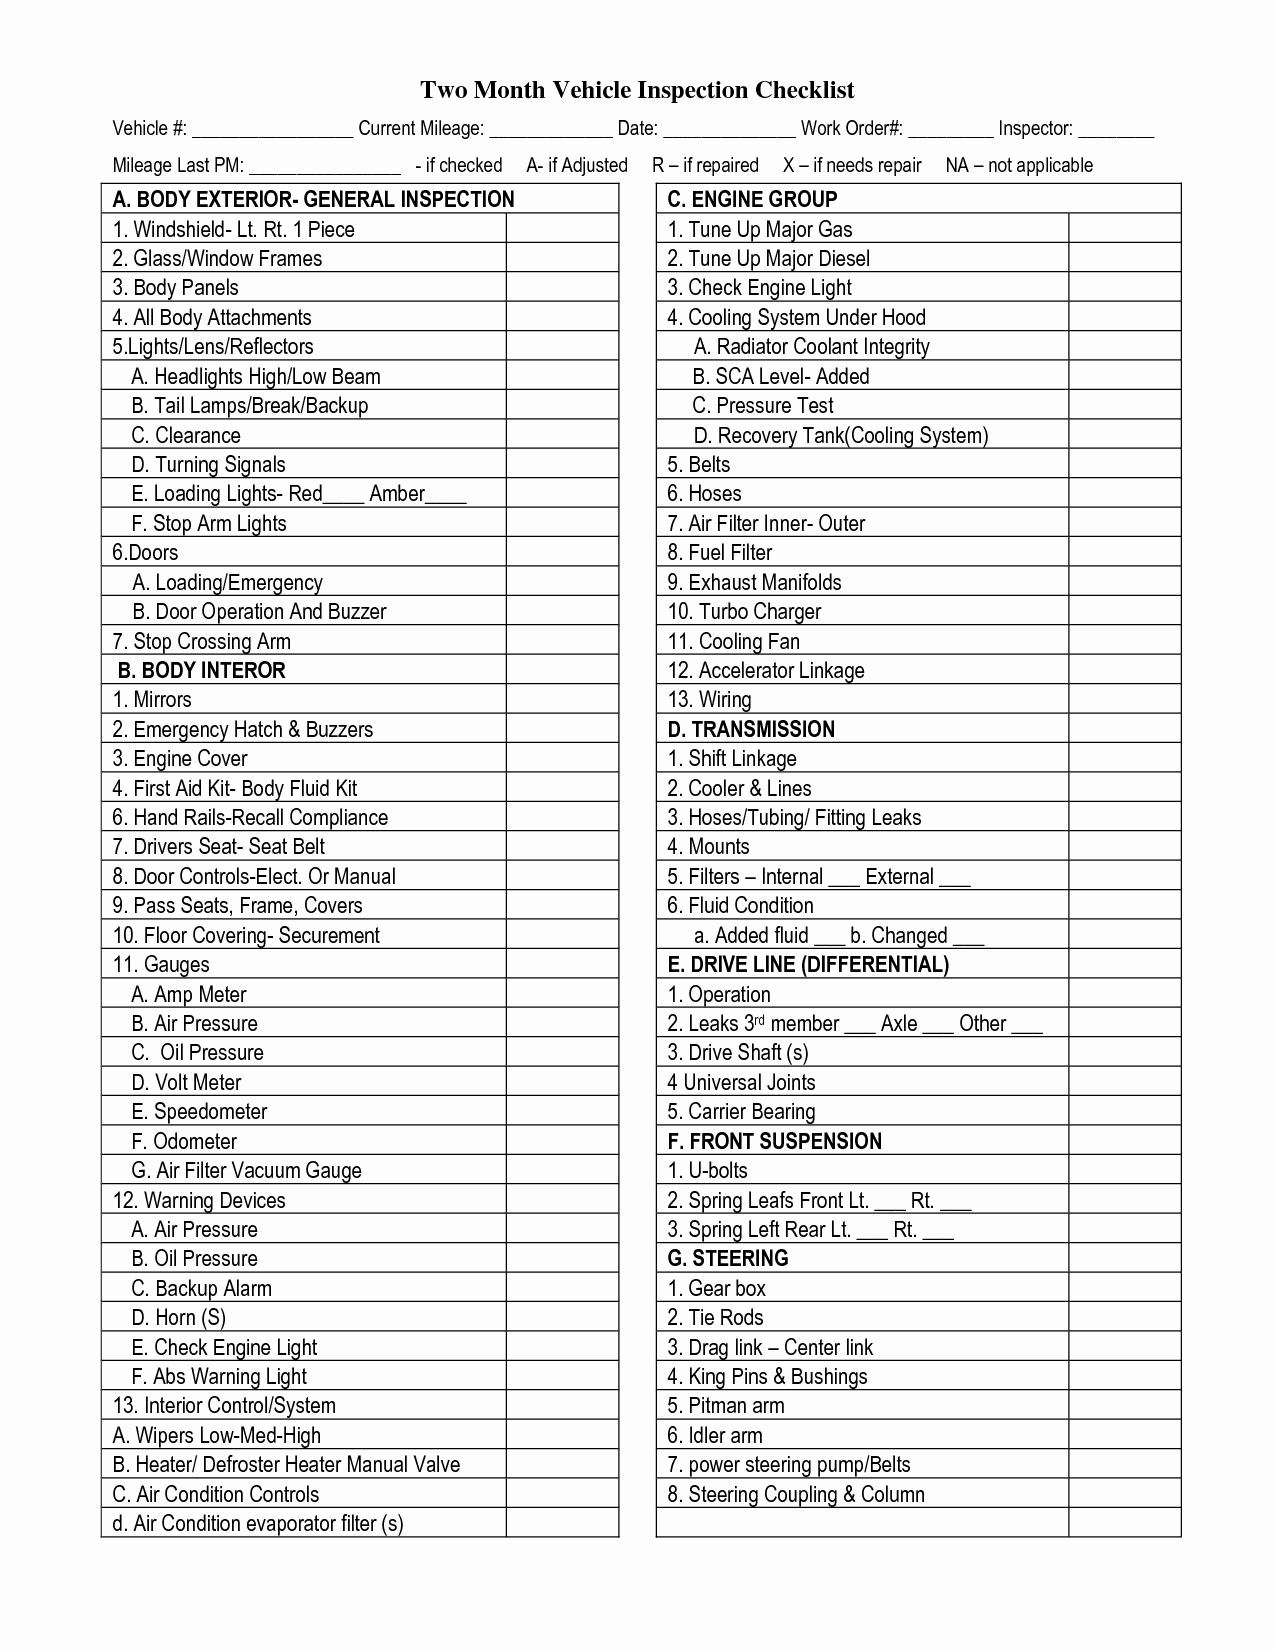 Certificate Of Inspection Template Unique Vehicle Inspection Checklist Template